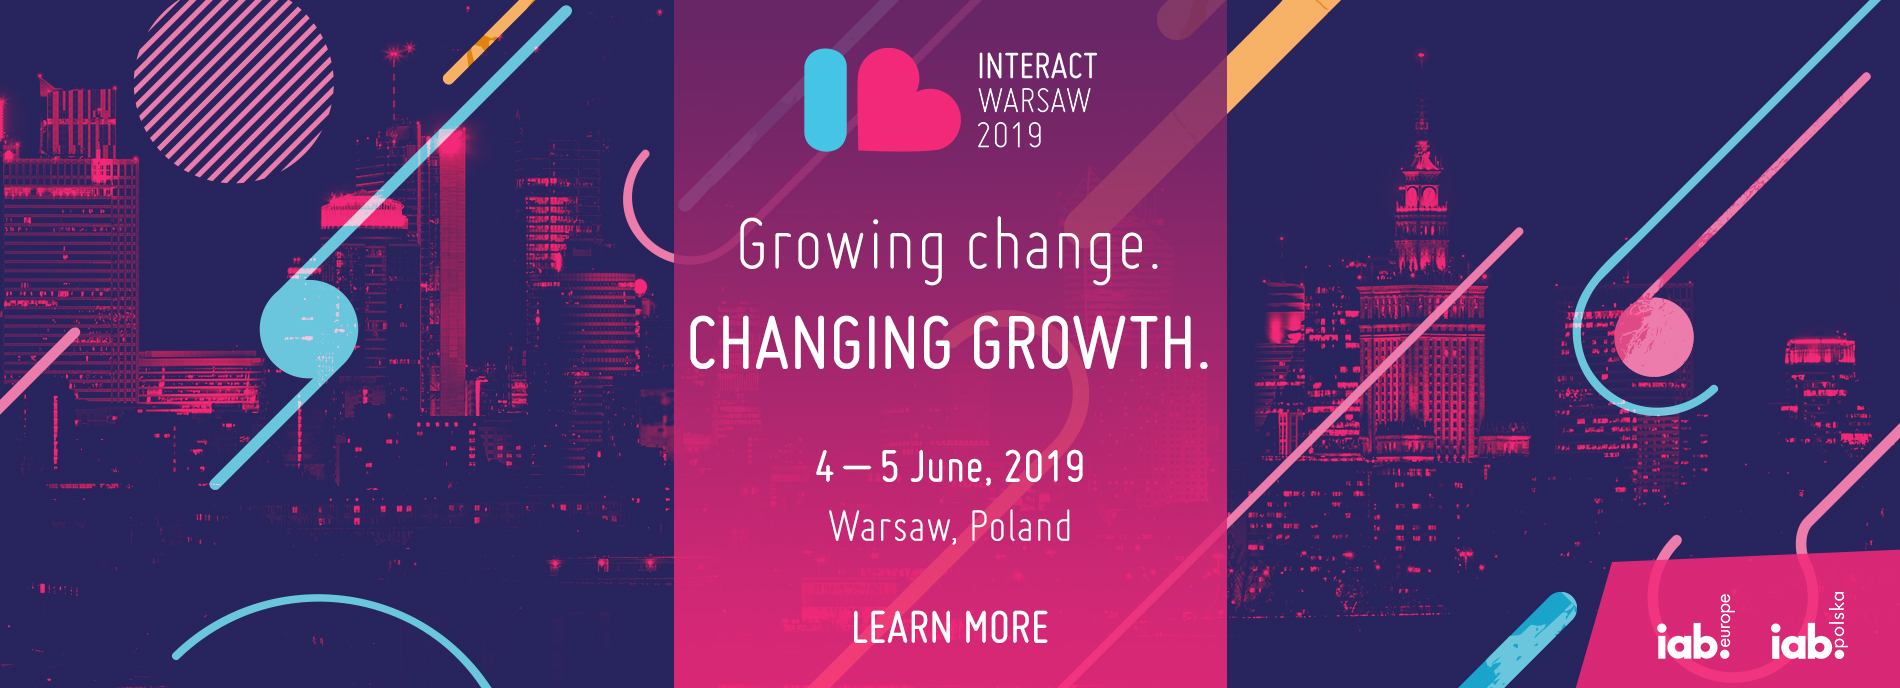 IAB Europe Announces First Speakers for Interact 2019 Conference